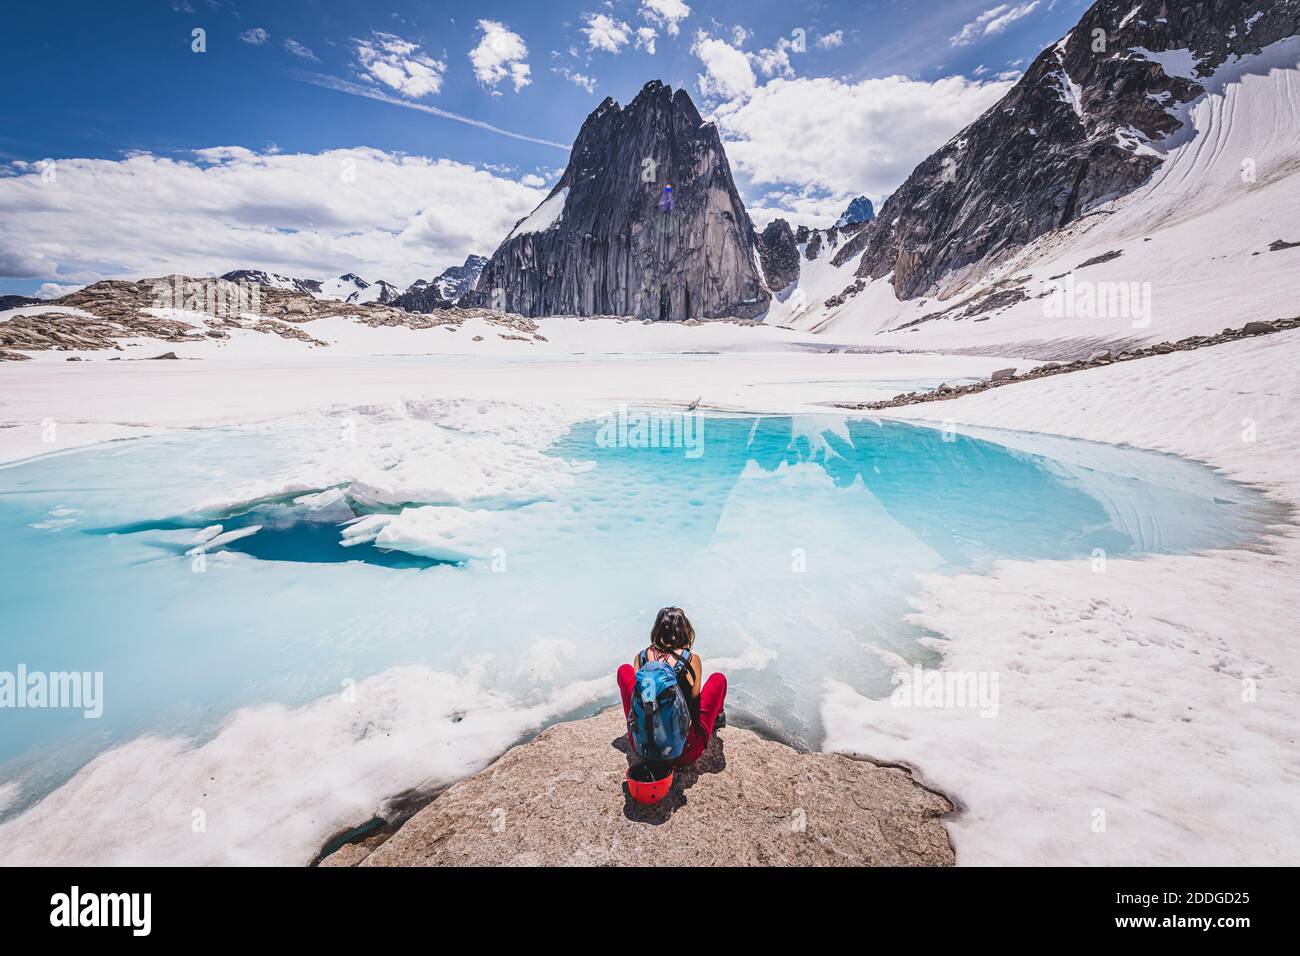 Climber looking at the view, Bugaboo Provincial Park, British Columbia, Canada Stock Photo